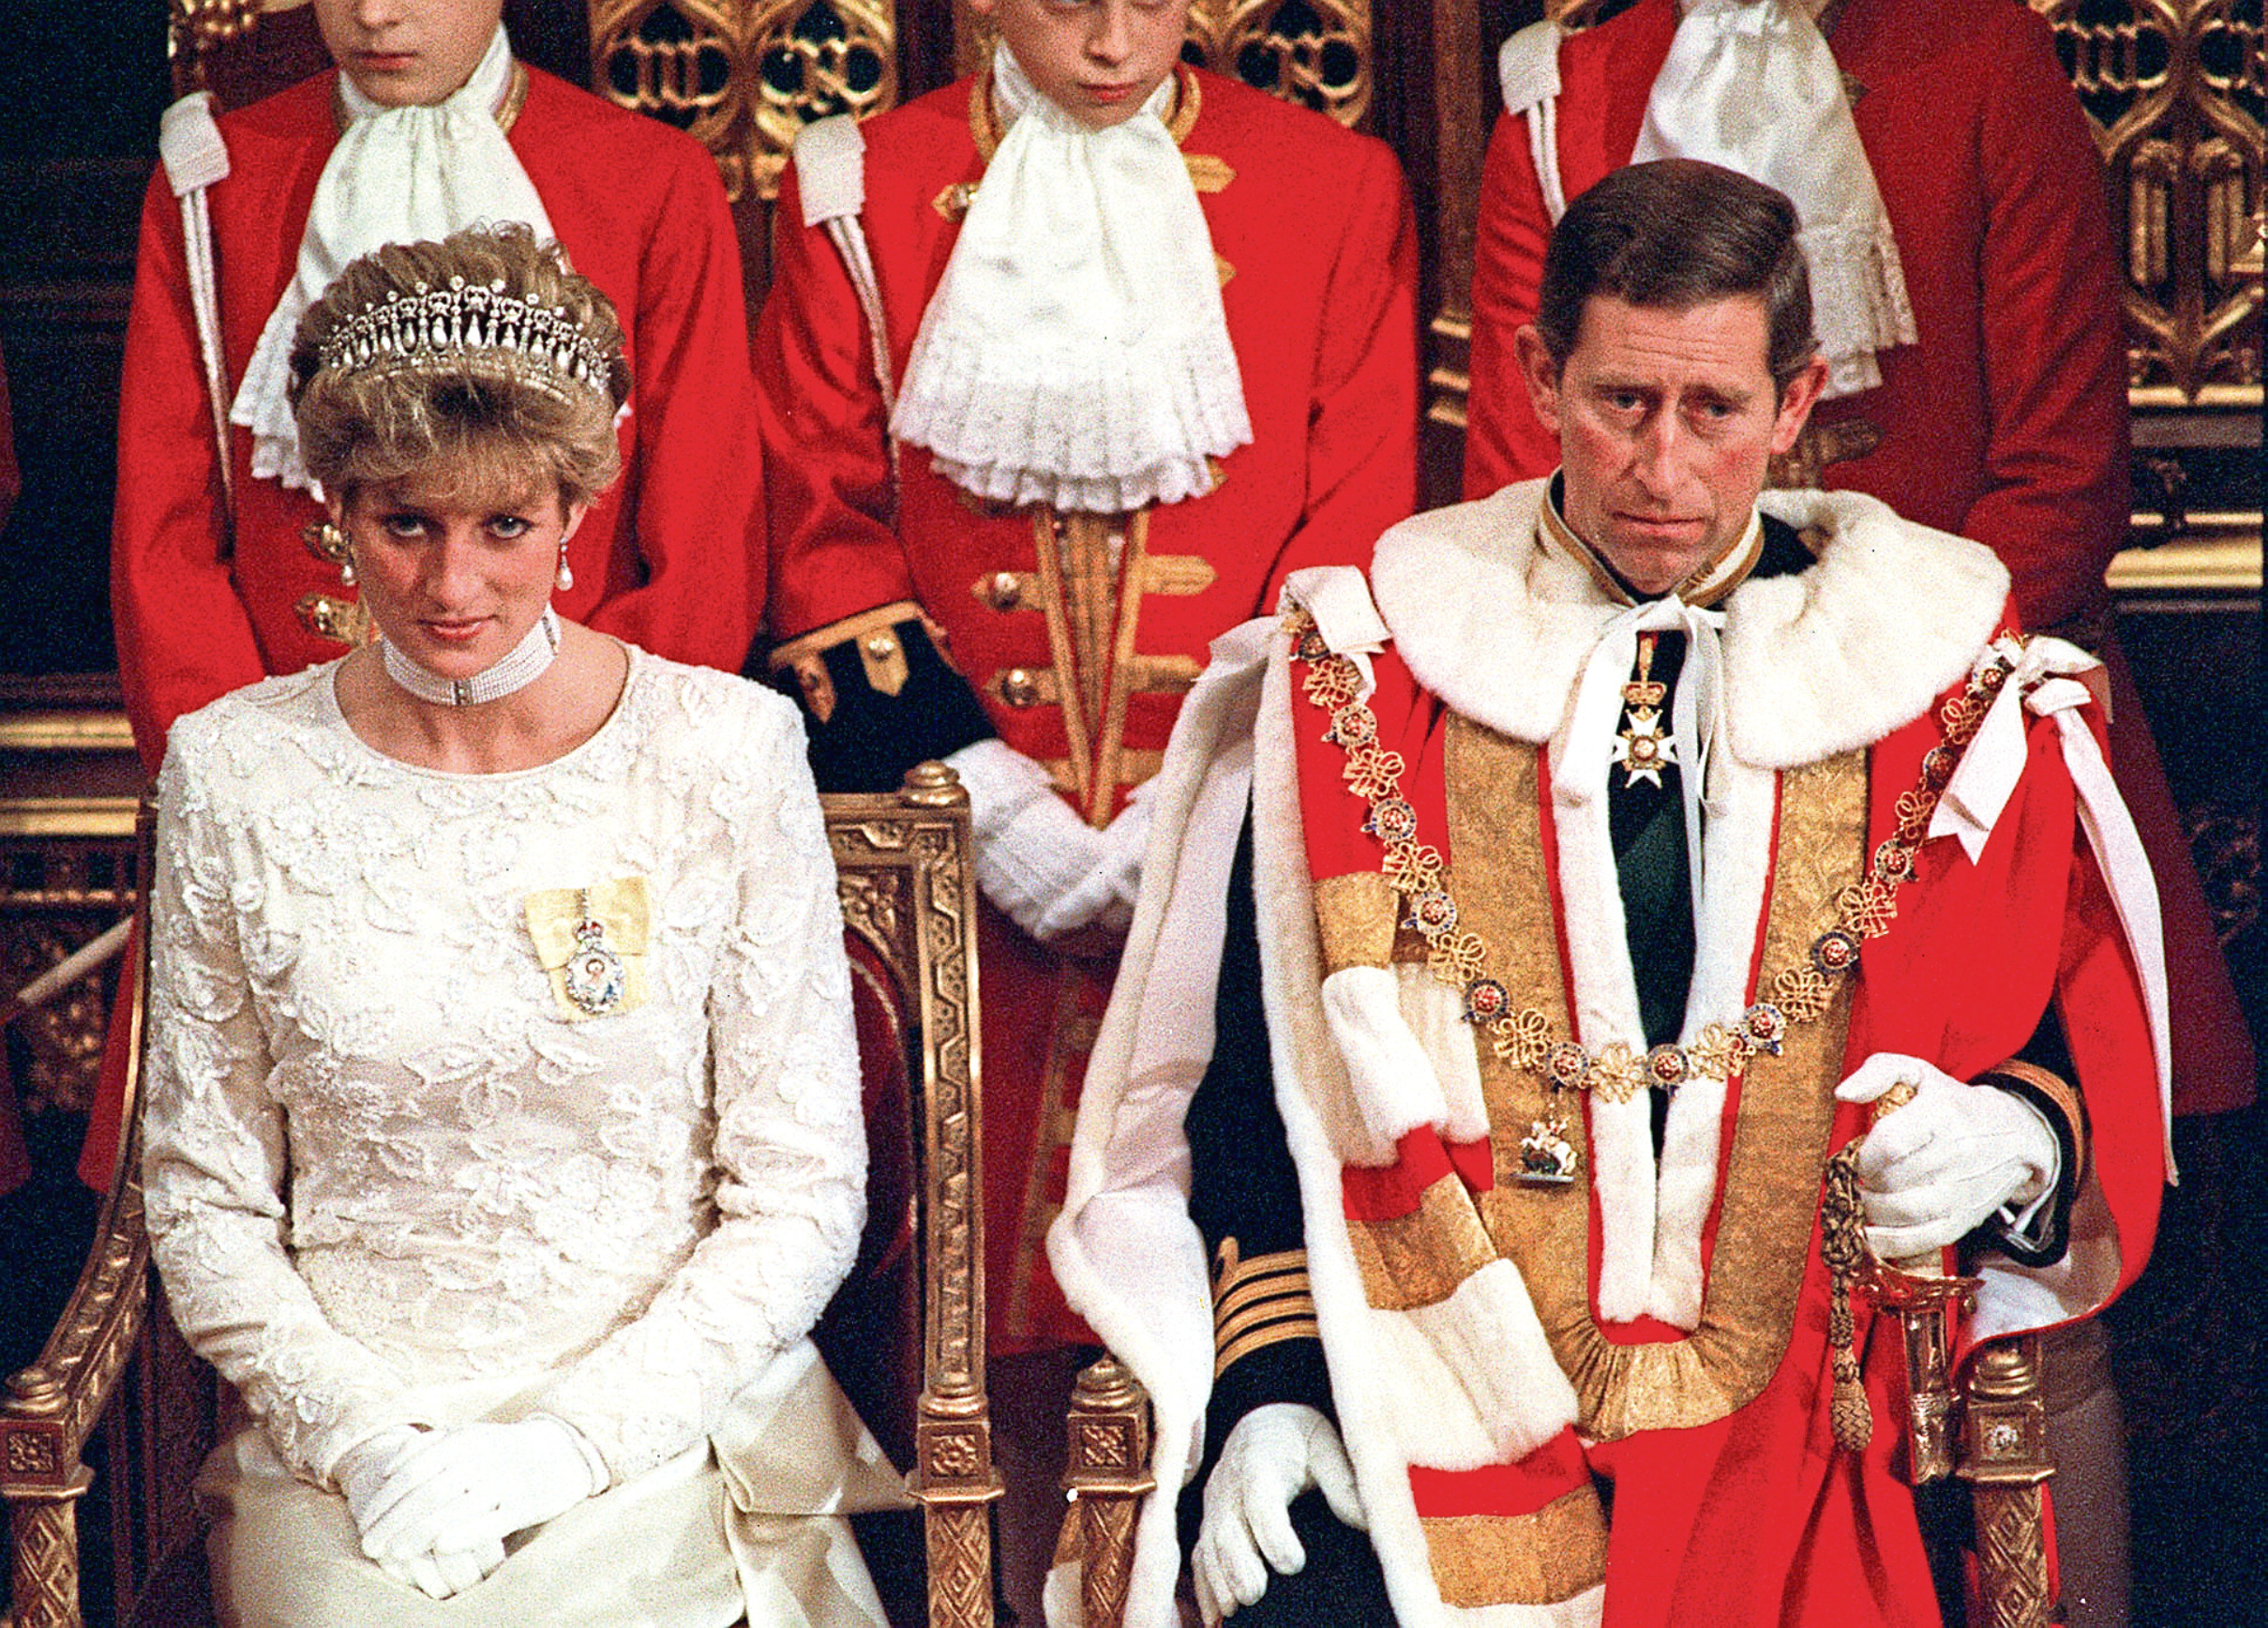 The Prince and Princess of Wales attend the State opening of Parliament